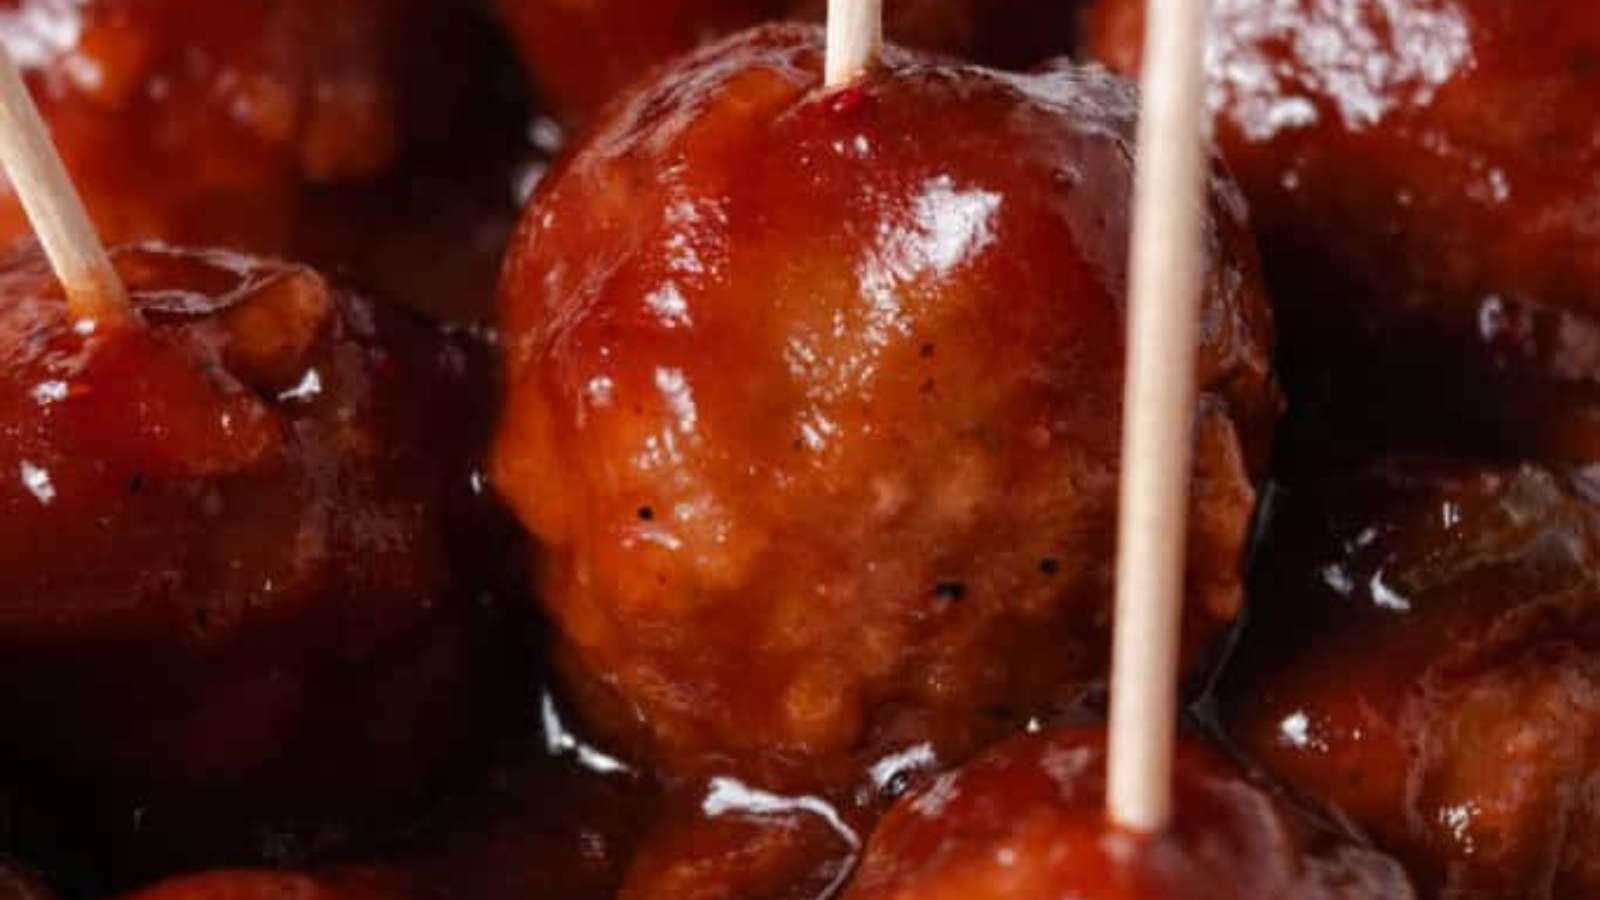 Meatballs with toothpicks on a plate.